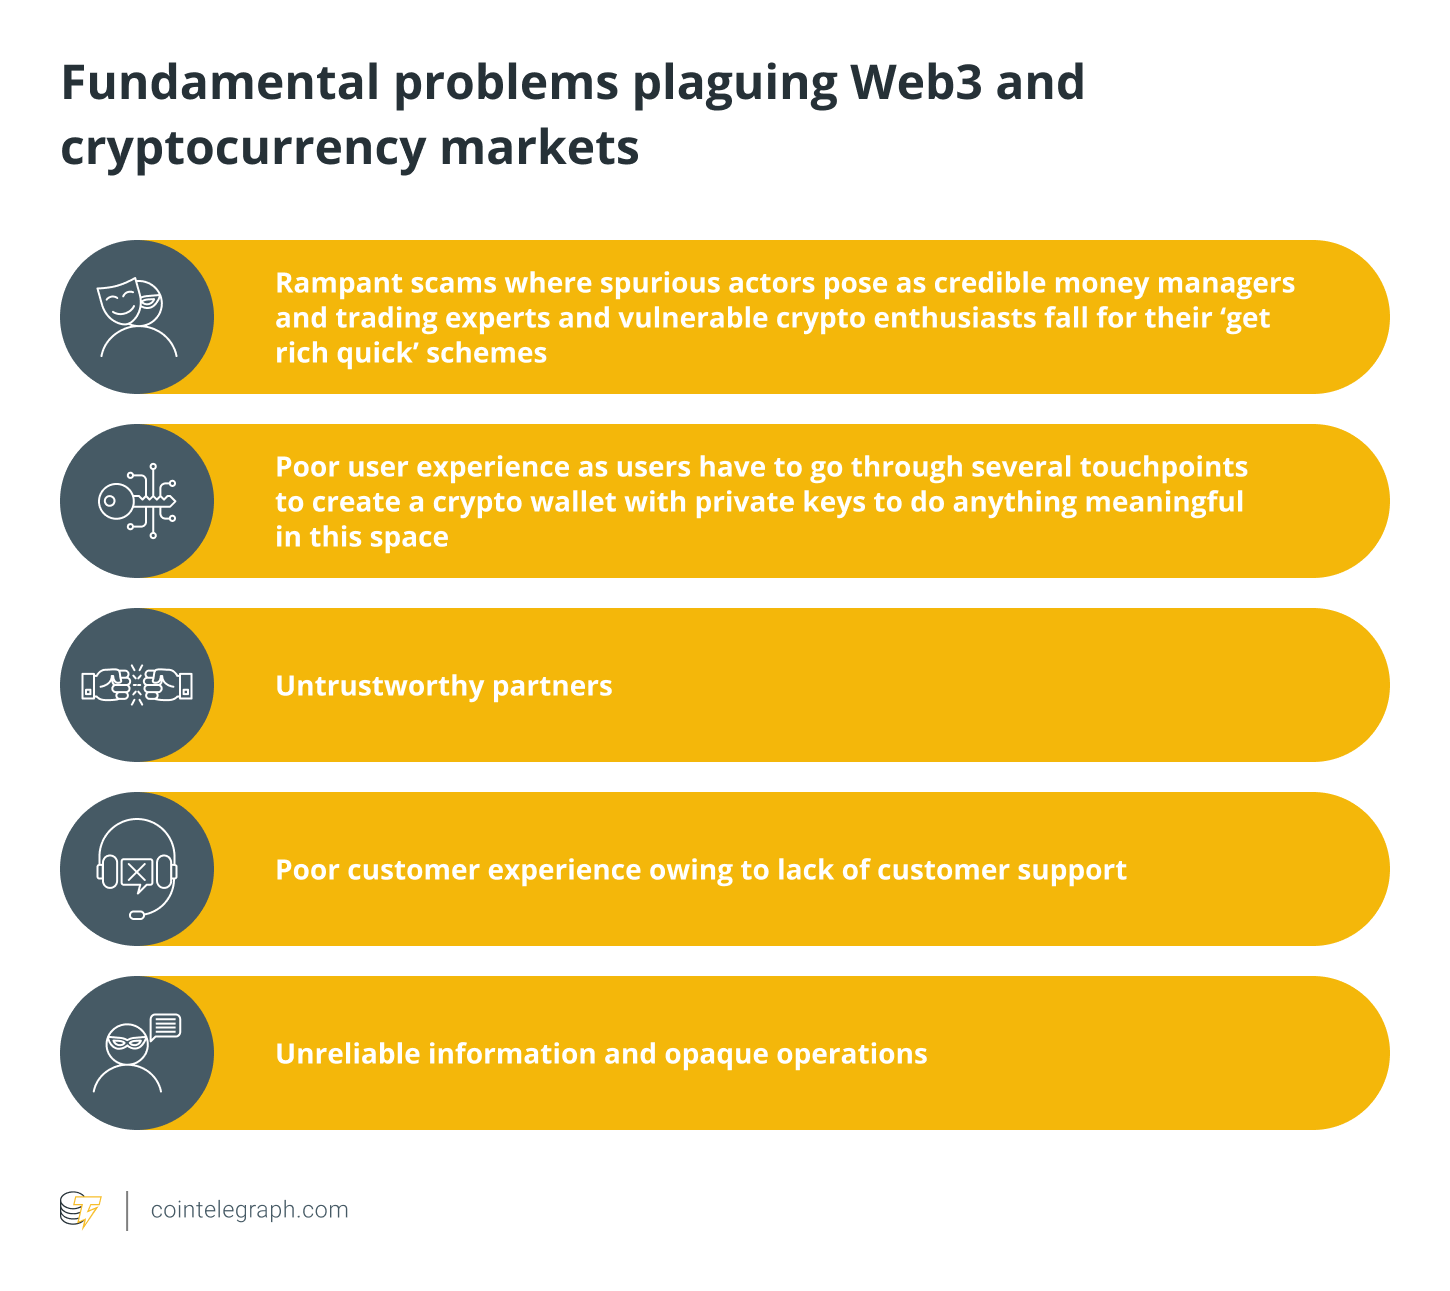 Fundamental problems plaguing Web3 and cryptocurrency markets